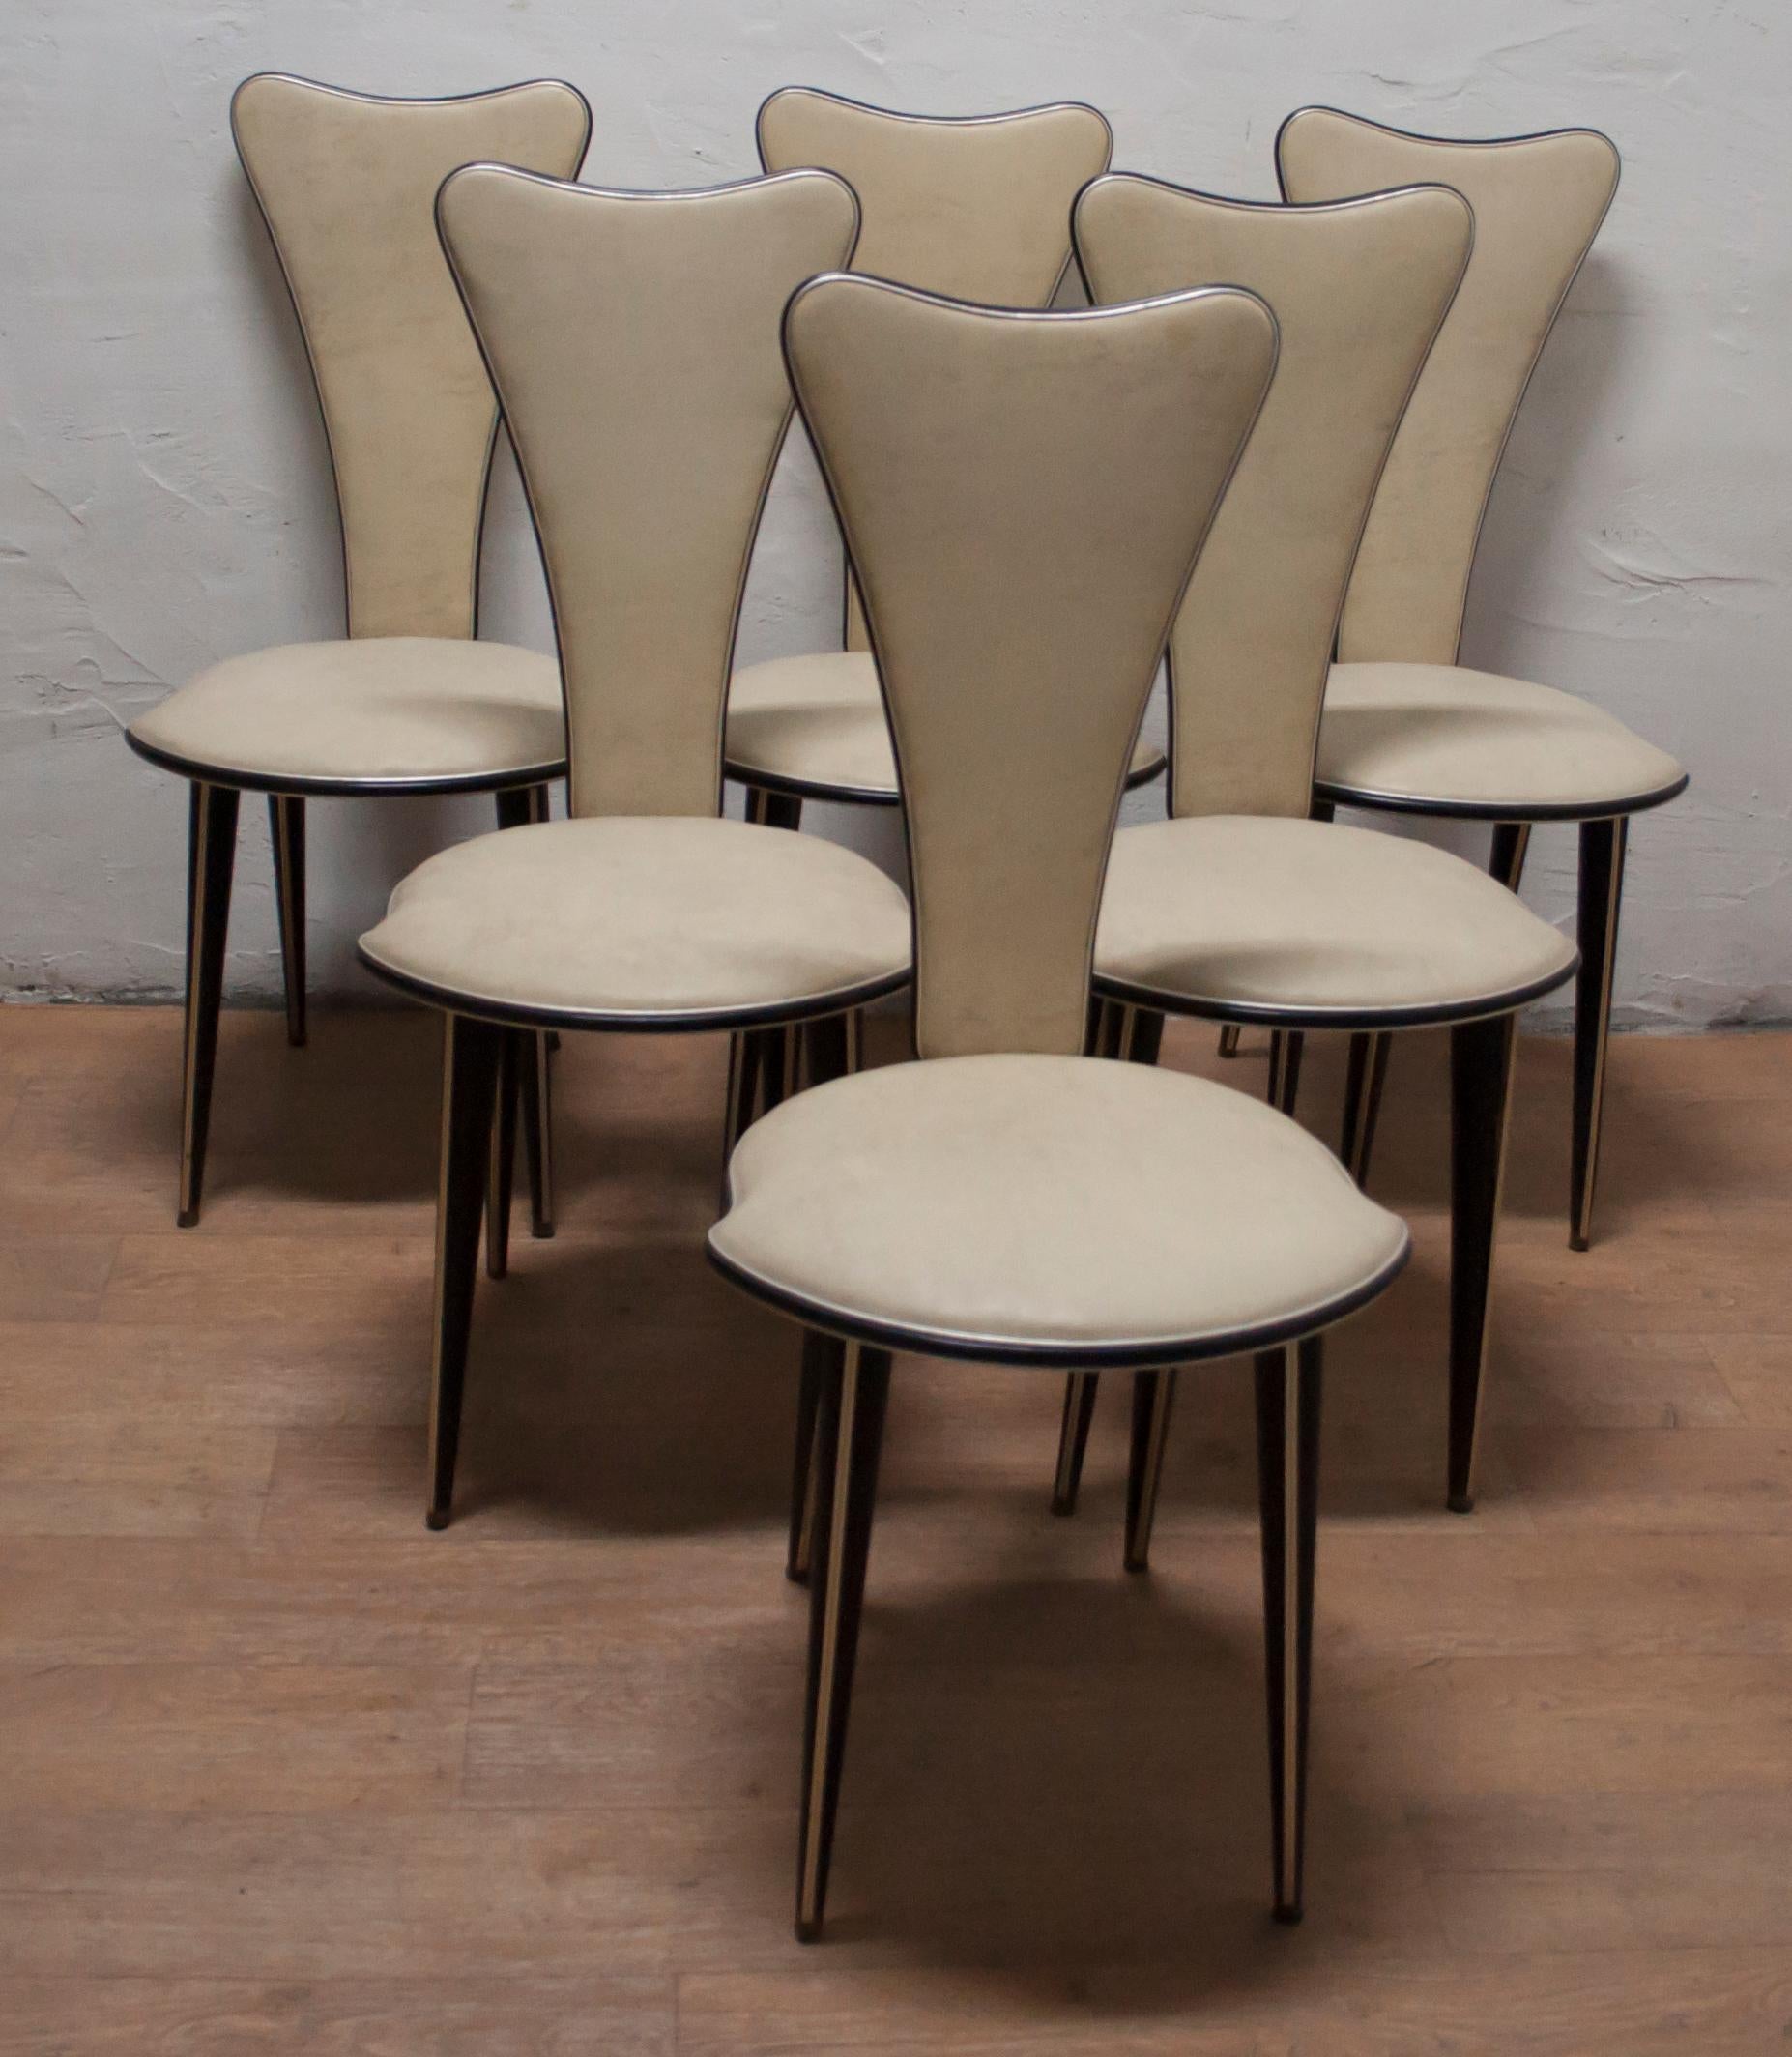 Six chairs designed by Umberto Mascagni of Bologna in the 1950s. The main body structure is made of solid European wood, covered in cream-colored vinyl with anodized aluminium. Even the legs are covered in black vinyl! Very attractive chairs,